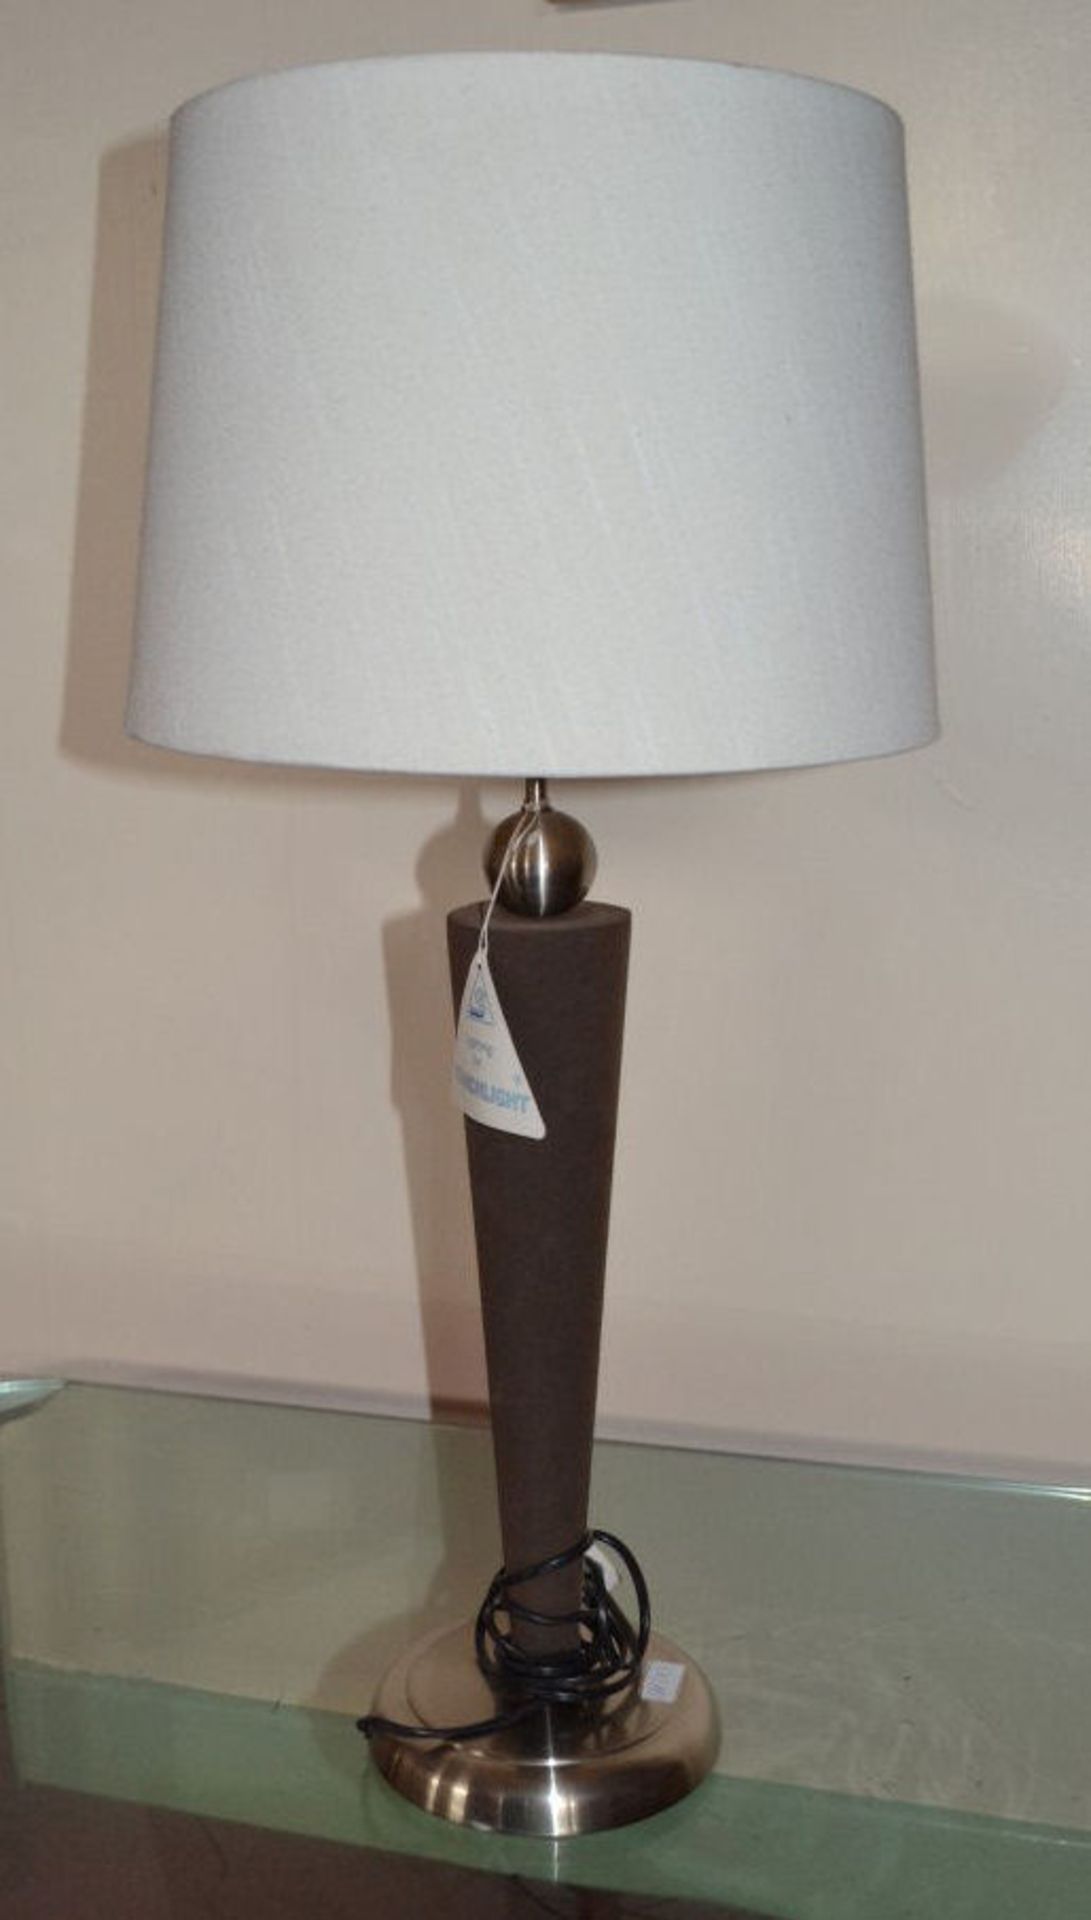 1 x Lamp - Brown Leather Look. With Round Shade. Original Retail £65. Height 71.5cm - CL108